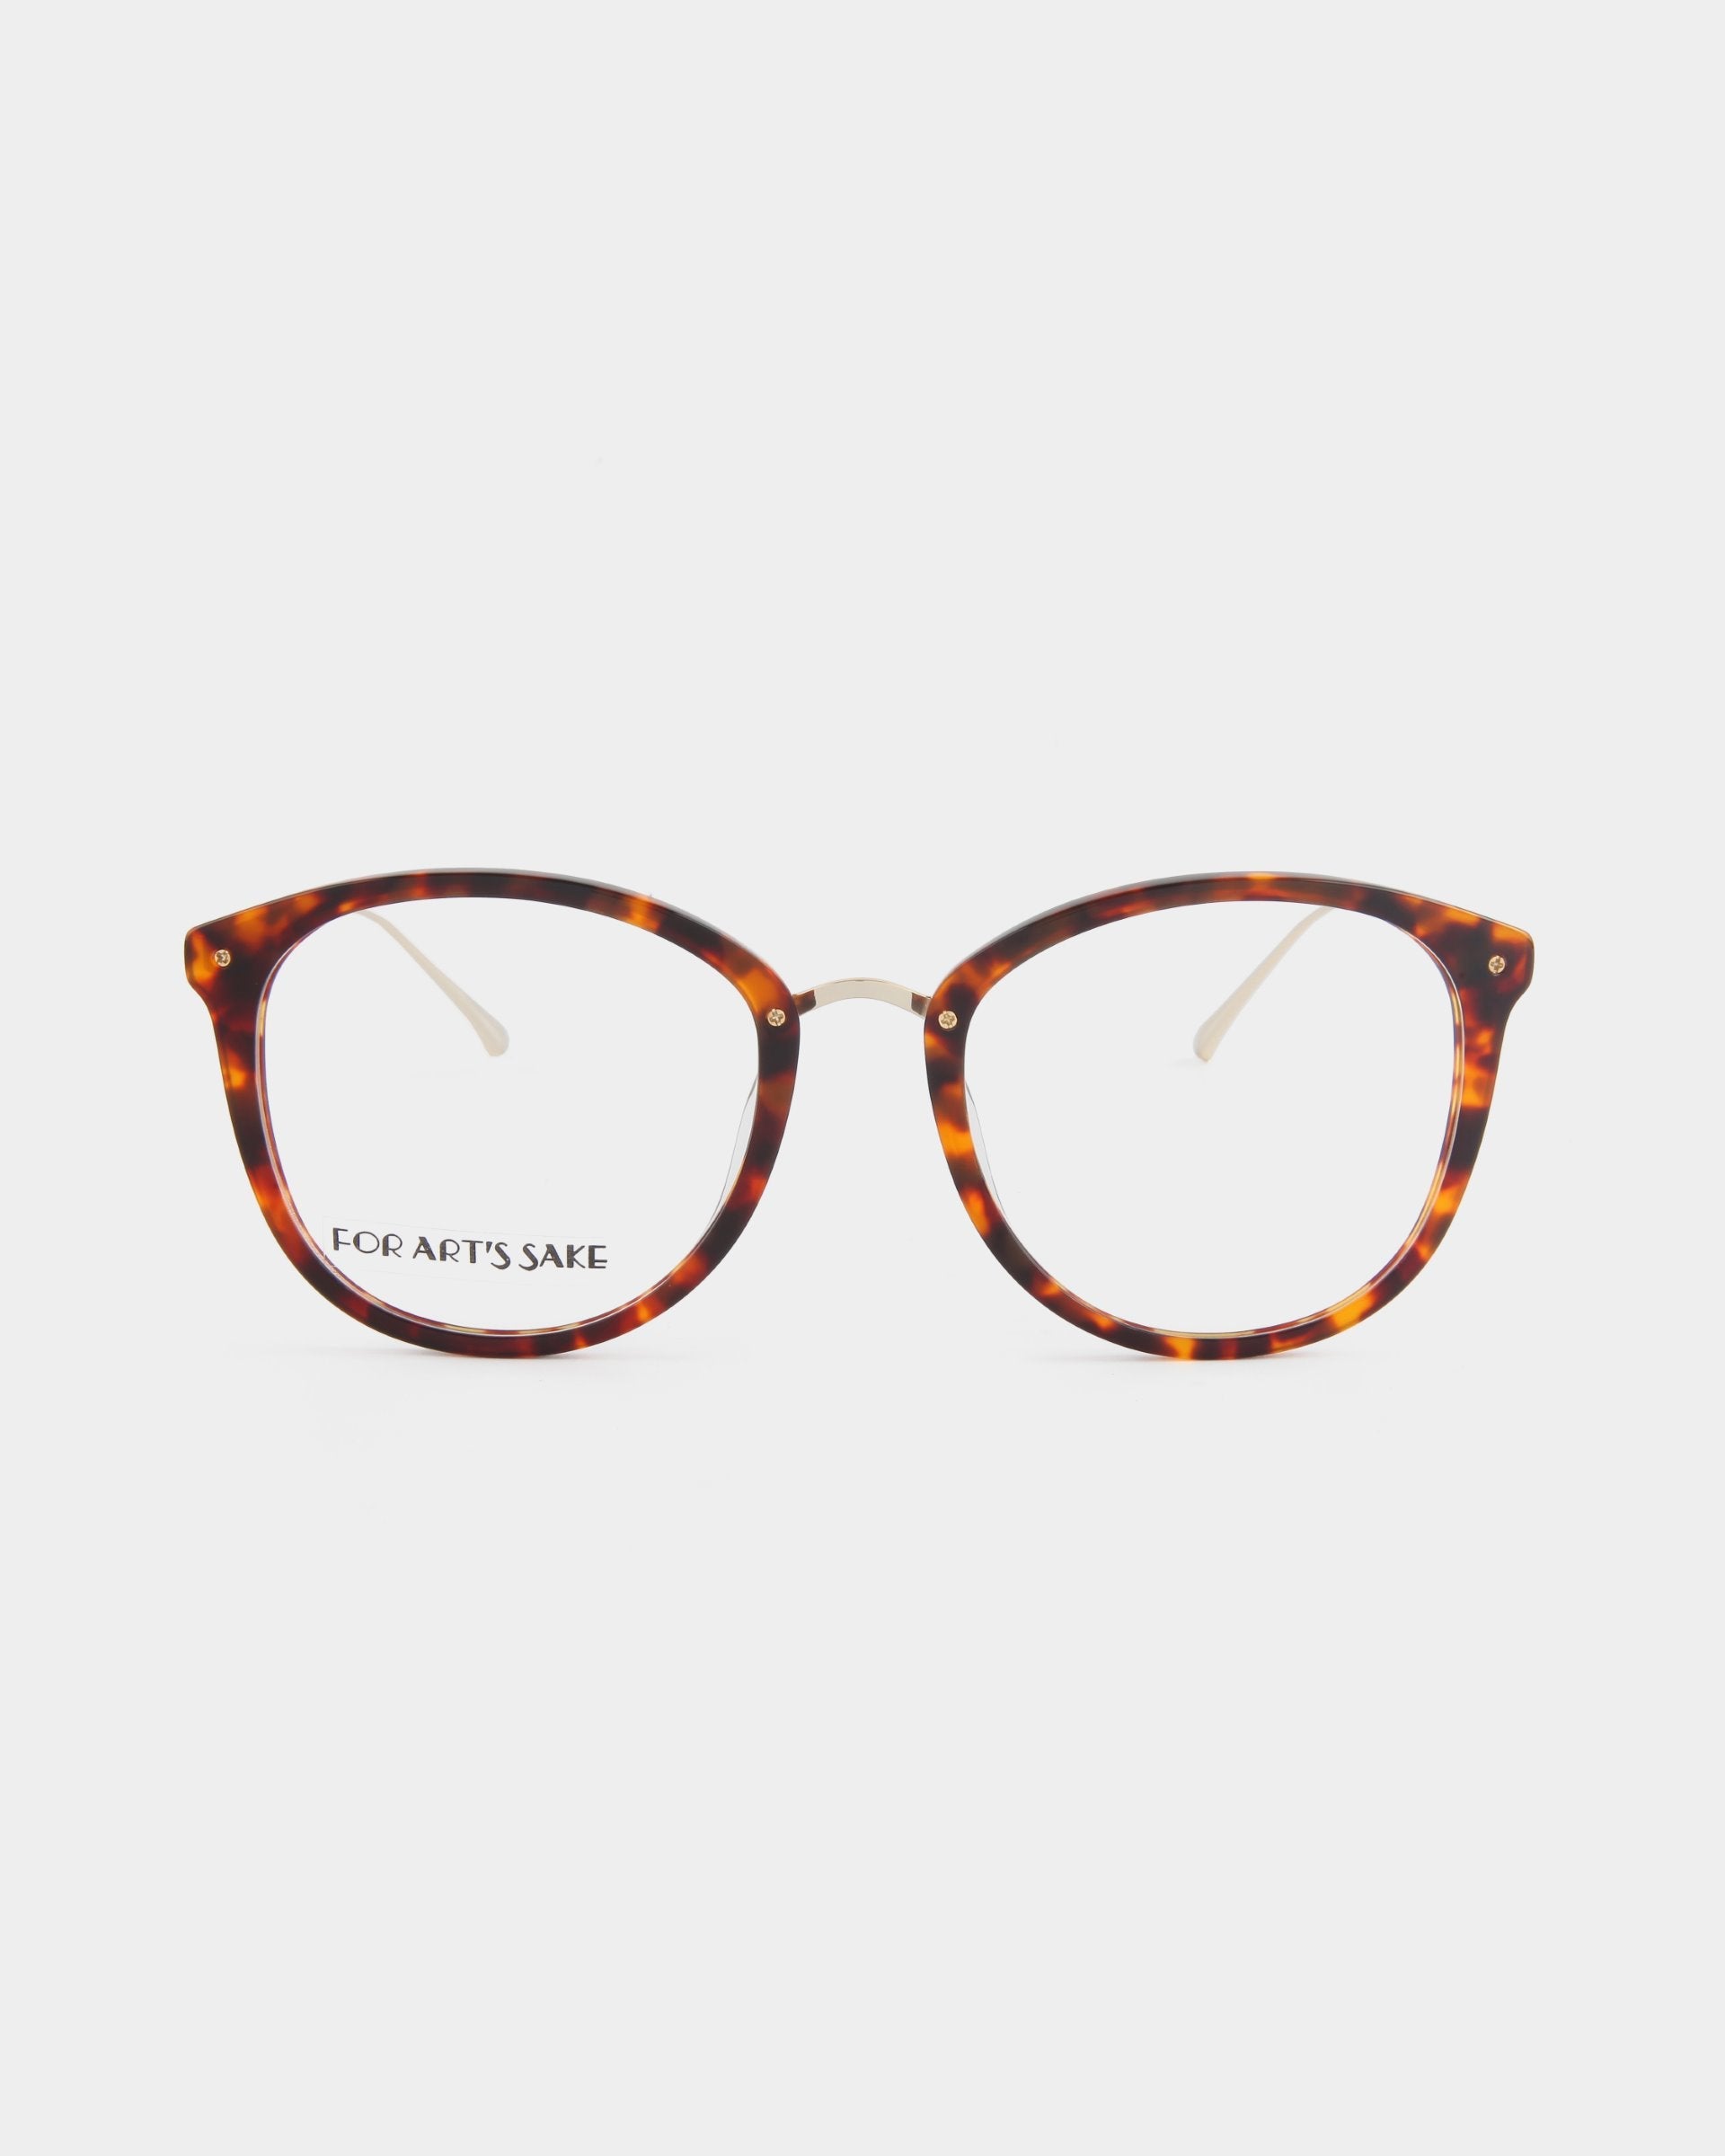 A pair of eyeglasses with round tortoiseshell frames and clear lenses is shown against a white background. The brand&#39;s name, &quot;For Art&#39;s Sake®,&quot; is visible on the inside of the left arm, highlighting their premium opticals which also come with an optional blue light filter for added protection.